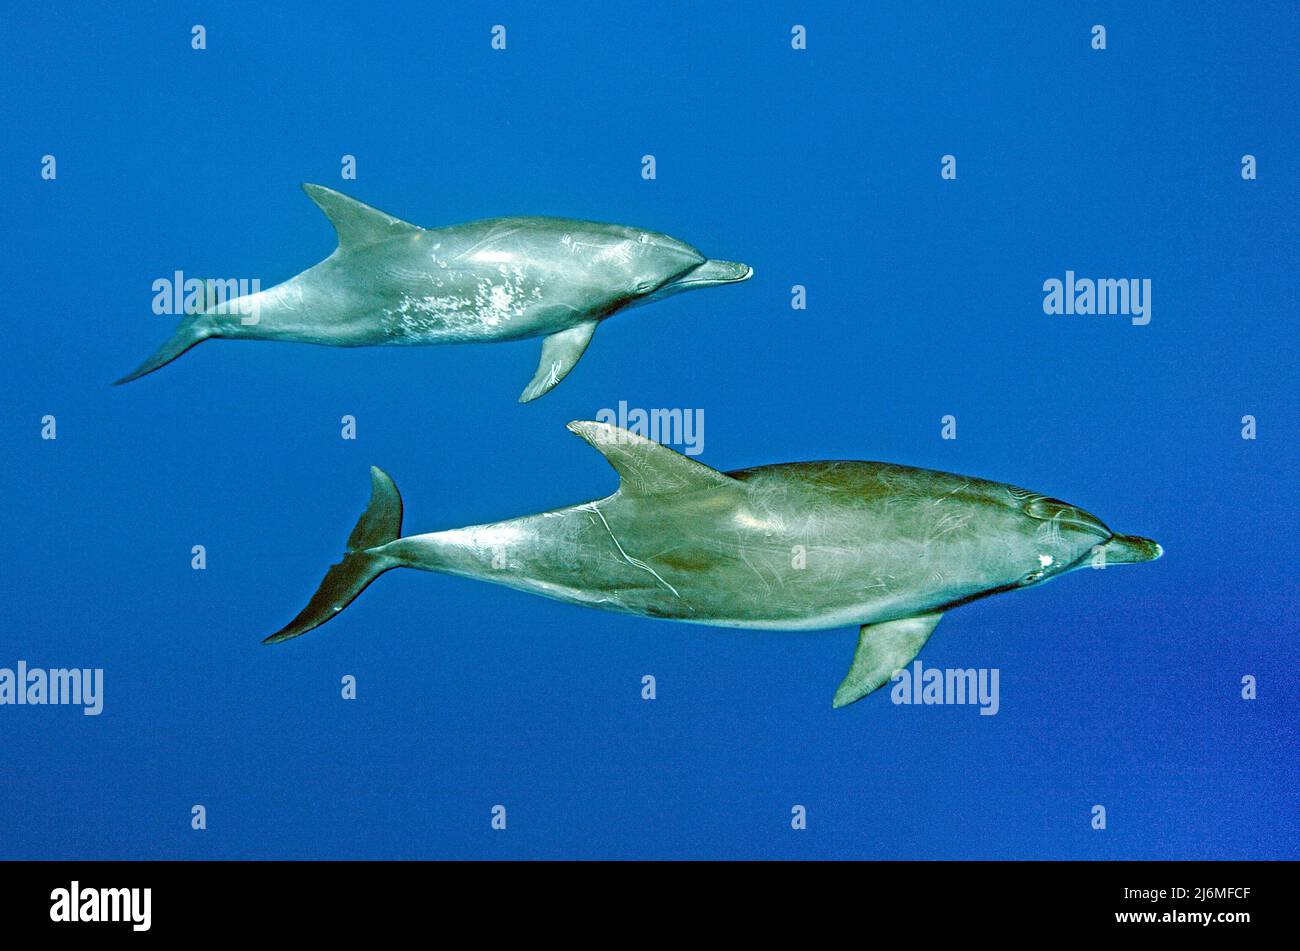 Indo-Pacific bottlenose dolphin (Tursiops aduncus), in blue water, Maldives, Indian Ocean, Asia Stock Photo